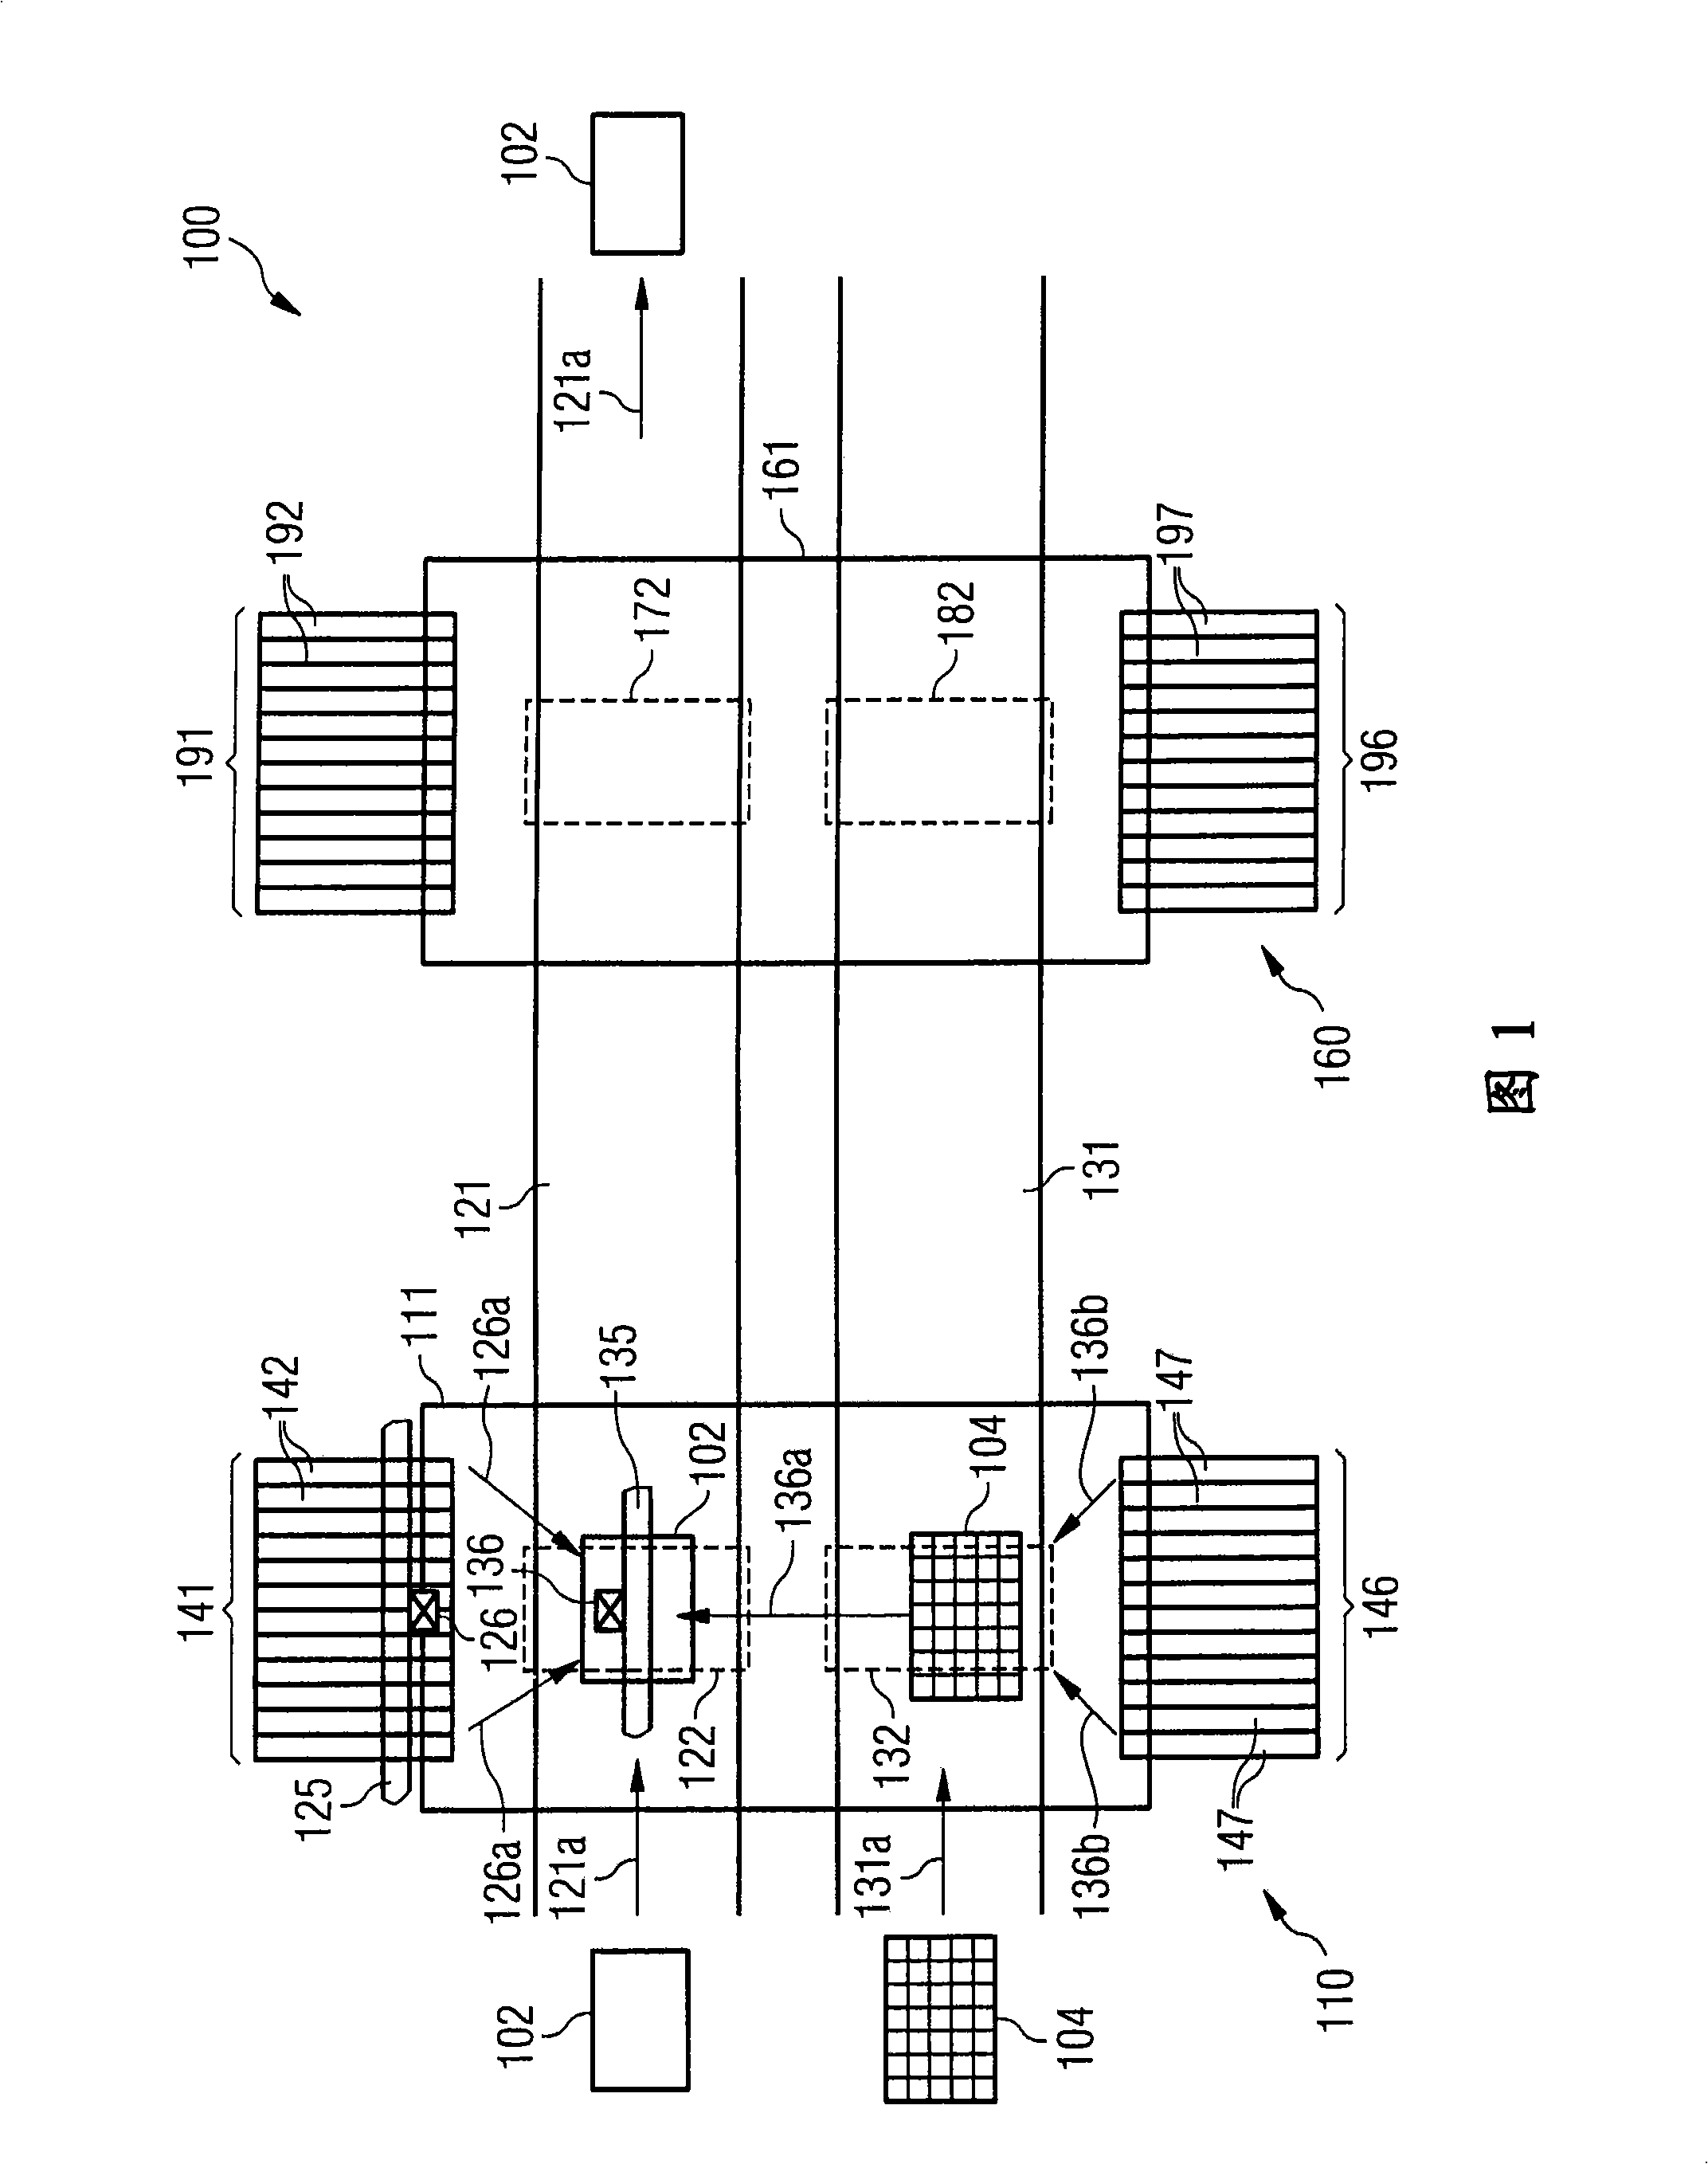 Supply of magazines via the conveyor of a circuit board transport system with multiple conveyor paths